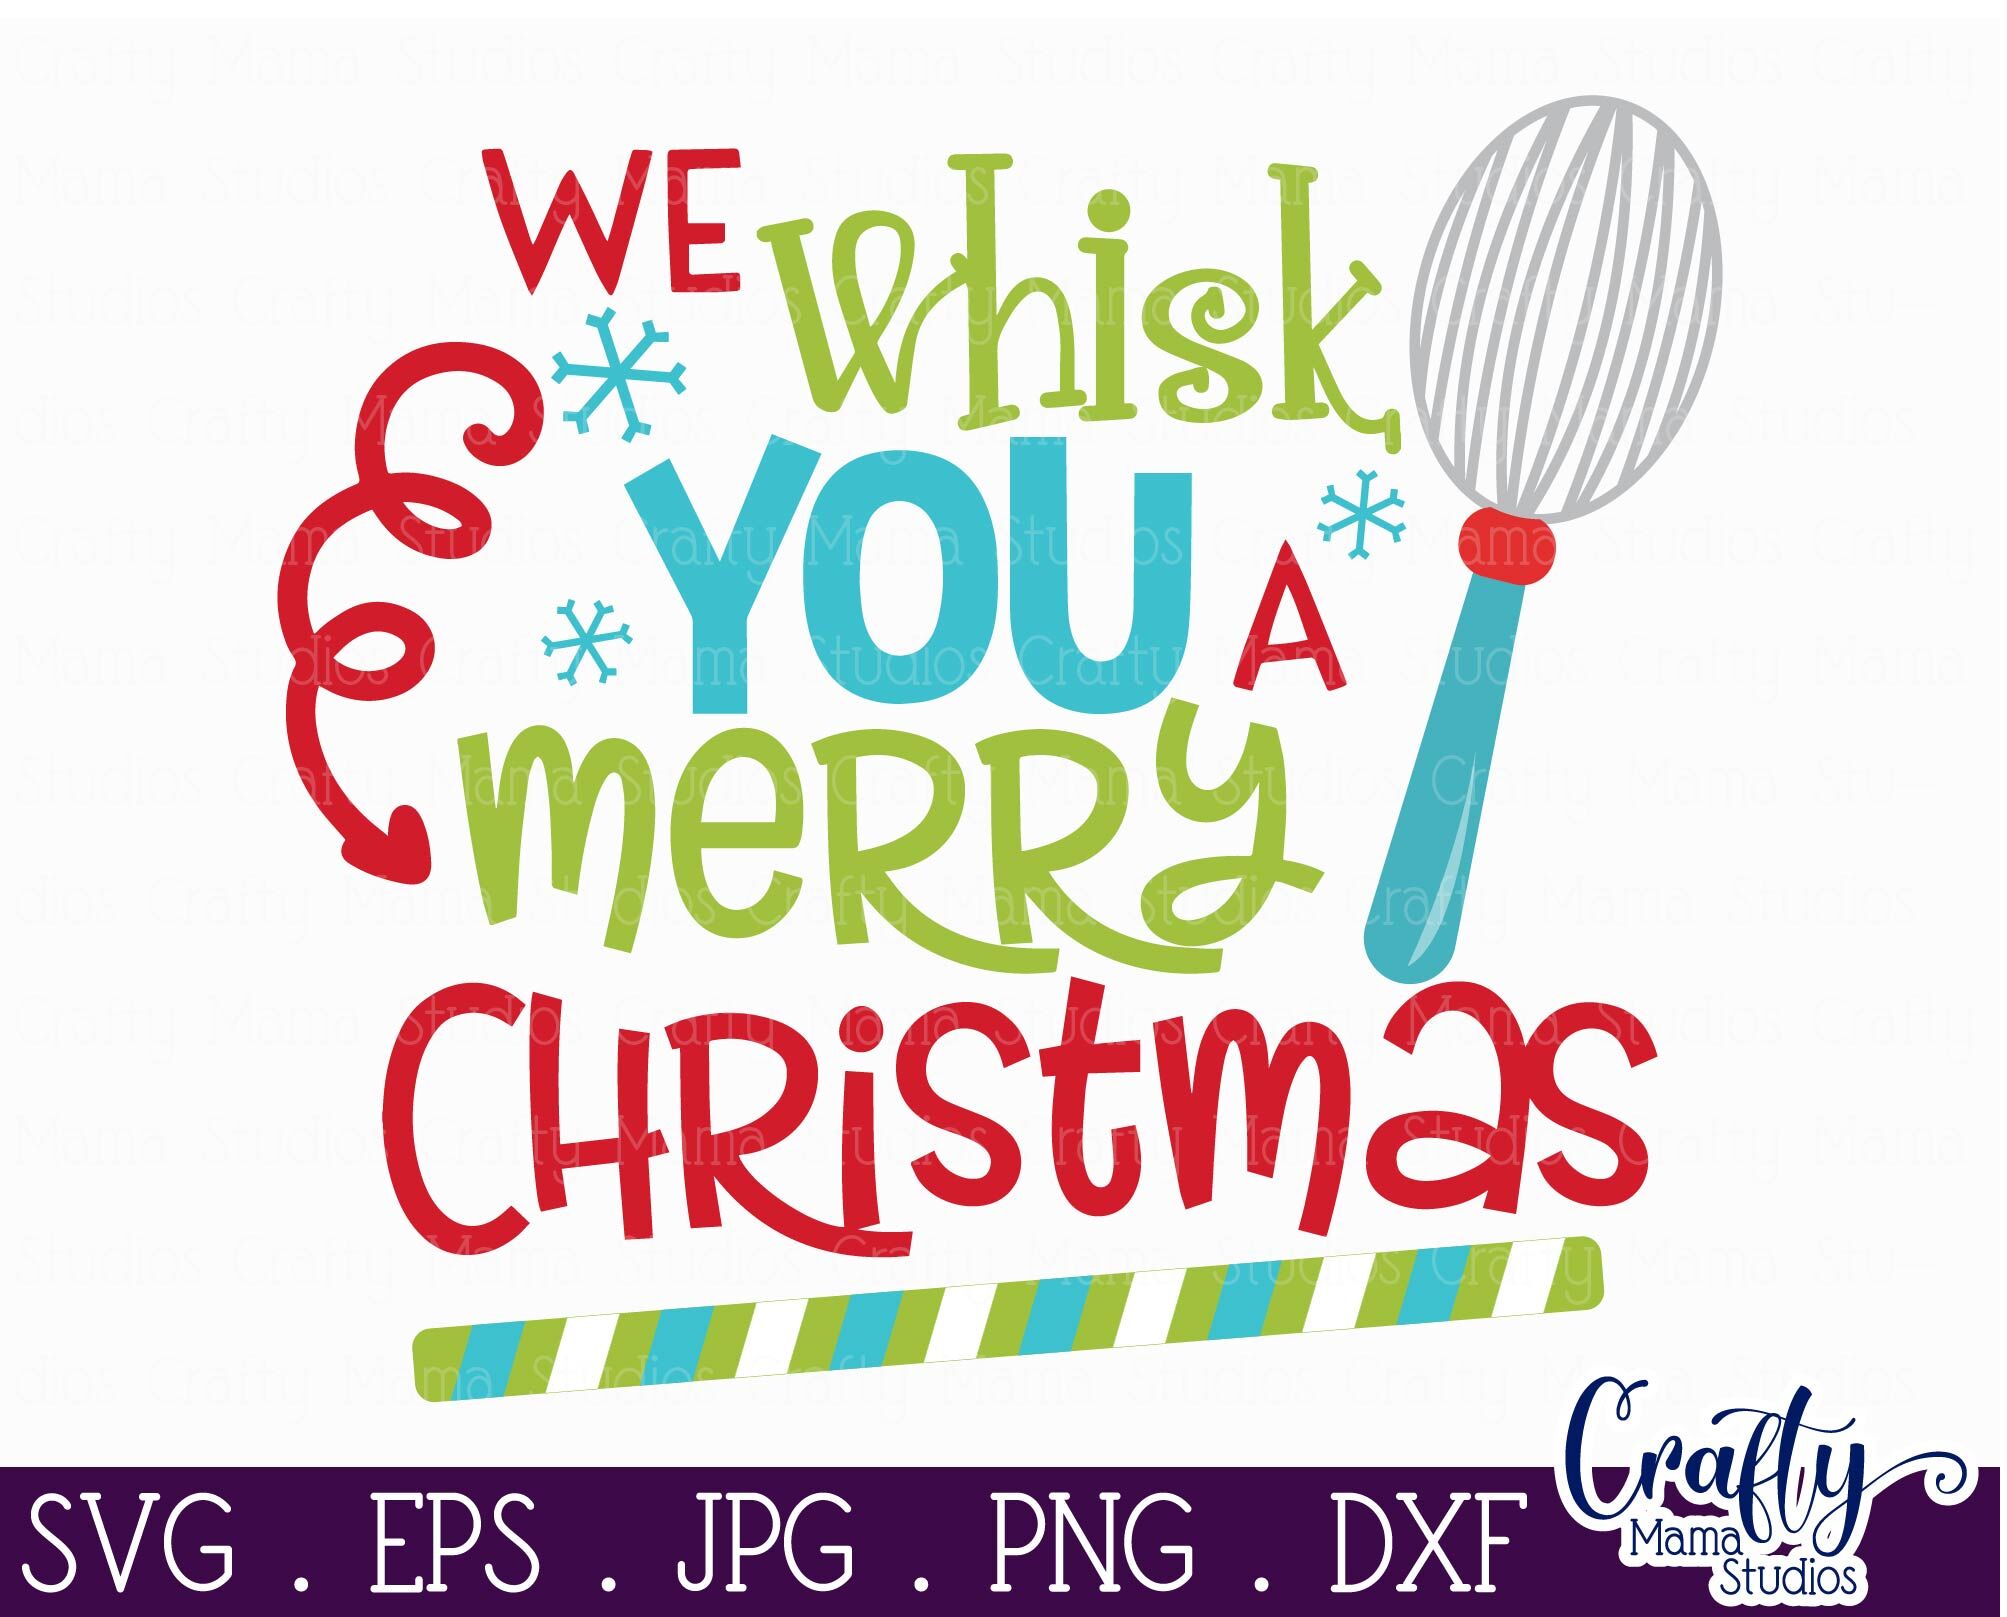 we-whisk-you-a-merry-kissmas-printable-for-coworkers-11-14-merry